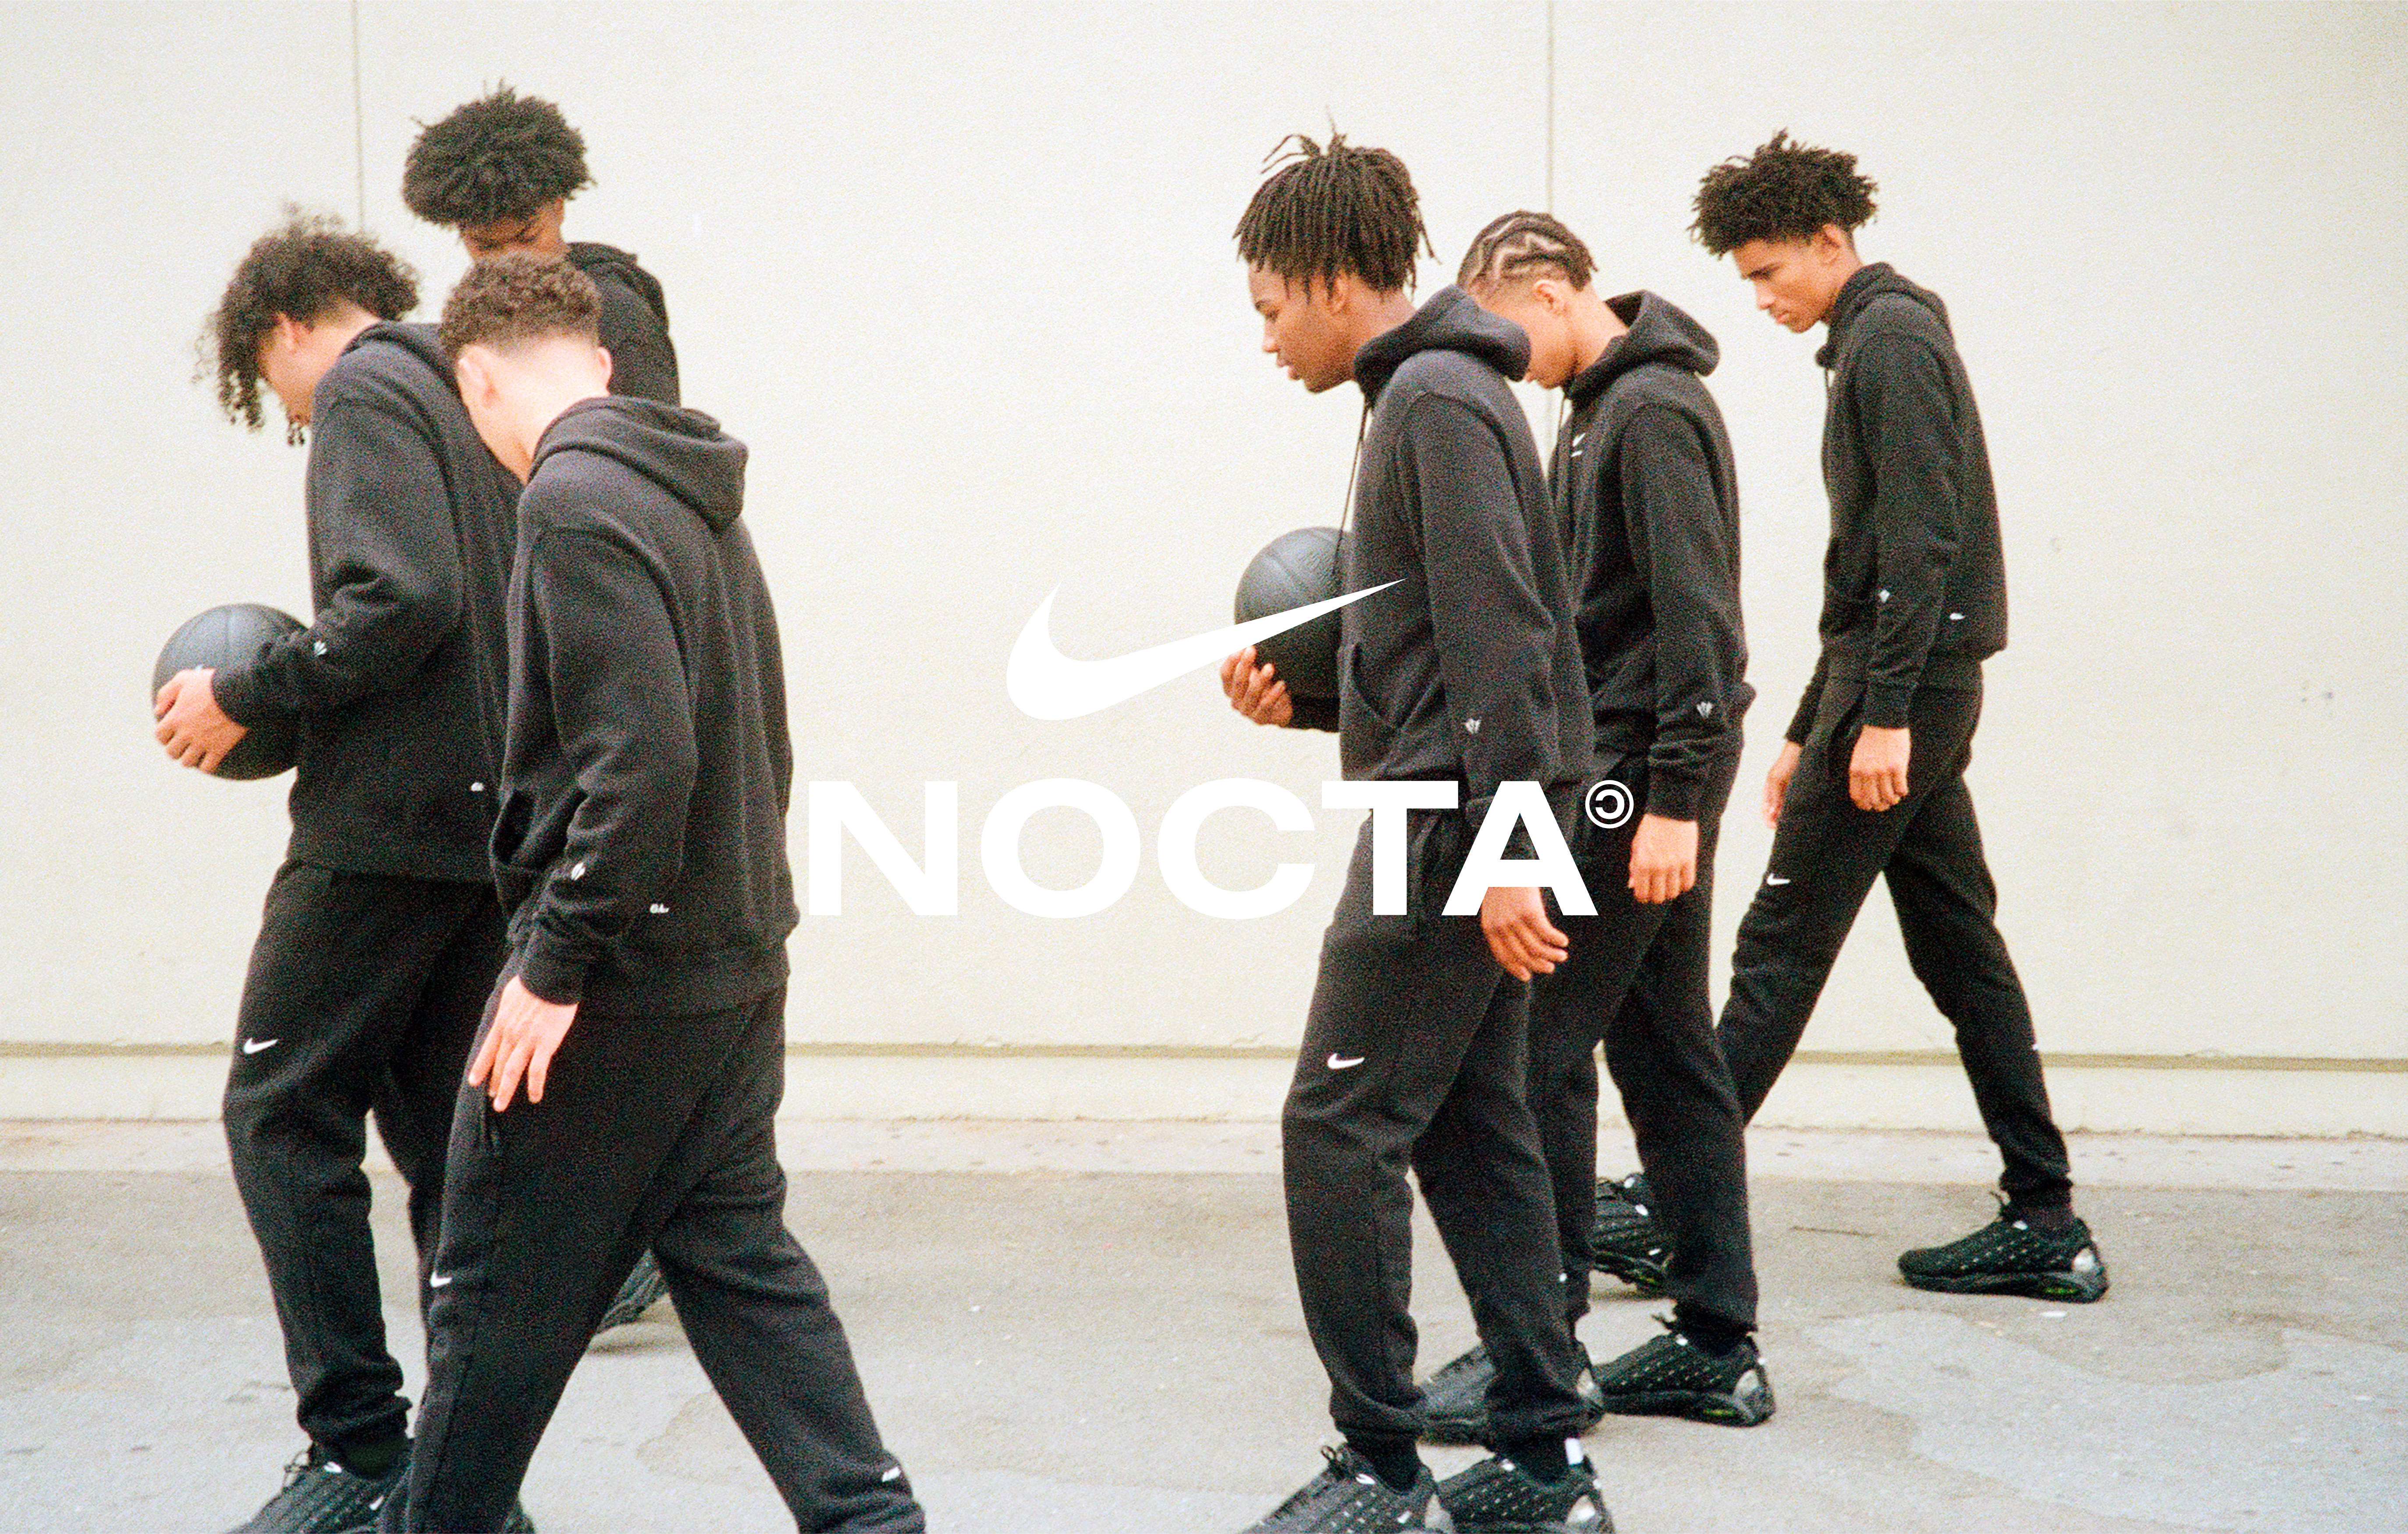 Drake's Nike Sub-Label NOCTA Unveils New Basketball Collection